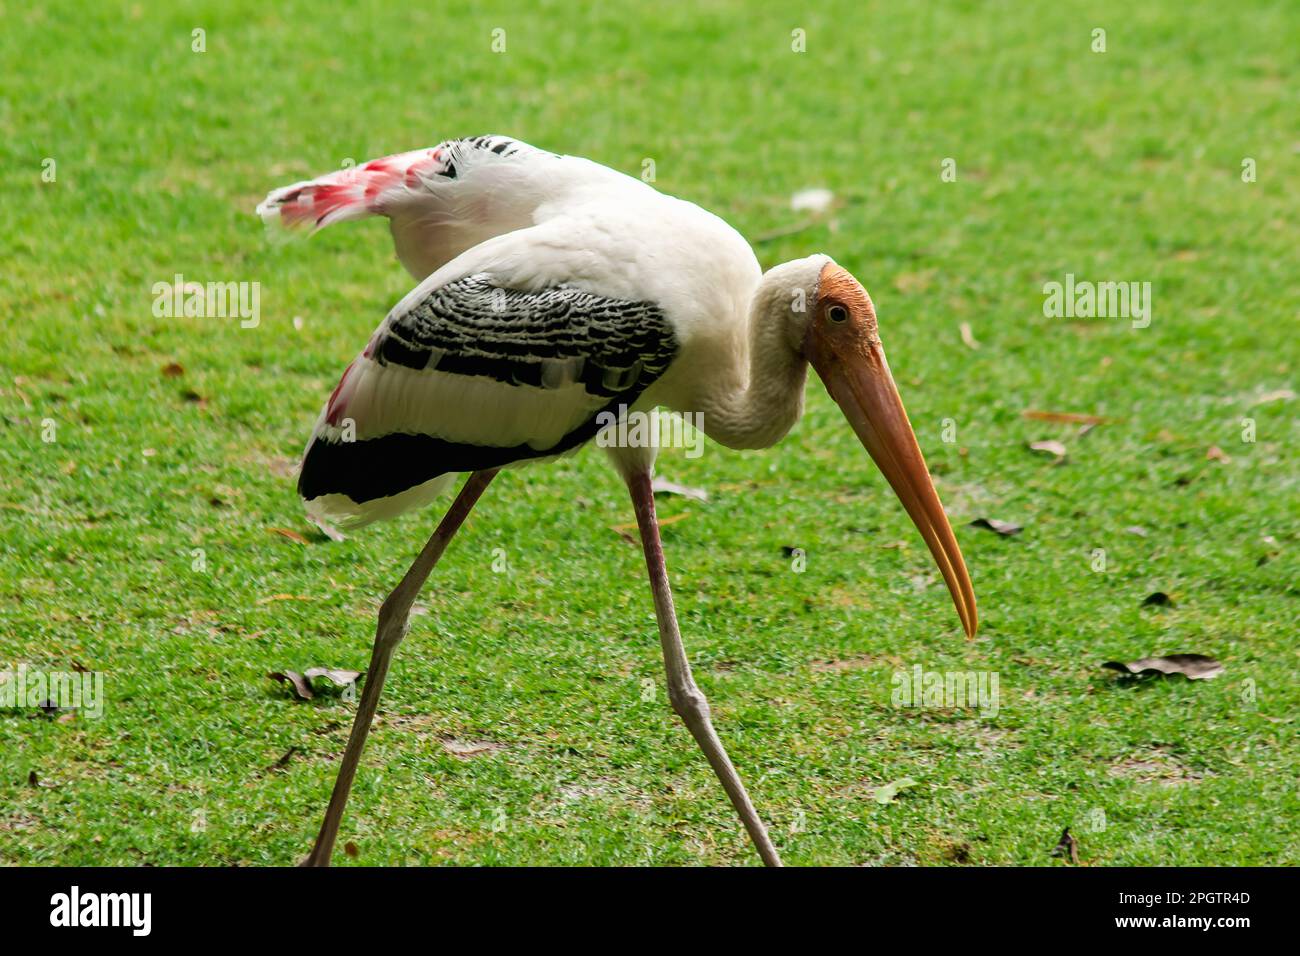 Painted Storks walk on the lawn. And has a unique pink plumage Painted Stork (Mycteria leucocephala) walking on the lawn. Unique pink plumage Stock Photo